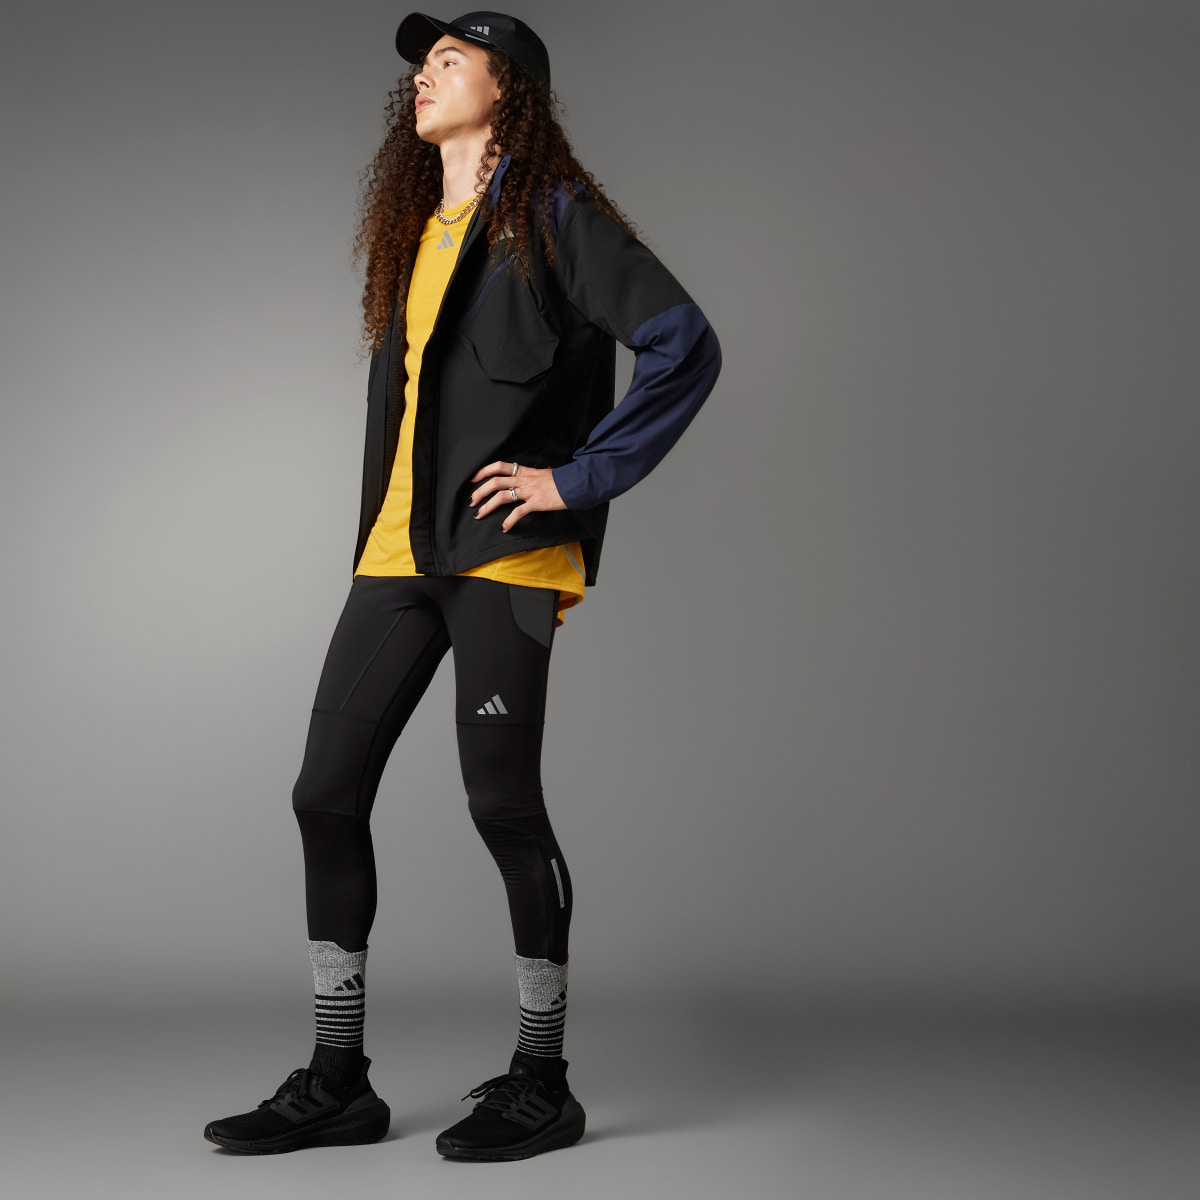 Adidas Ultimate Running Conquer the Elements COLD.RDY Leggings. 9